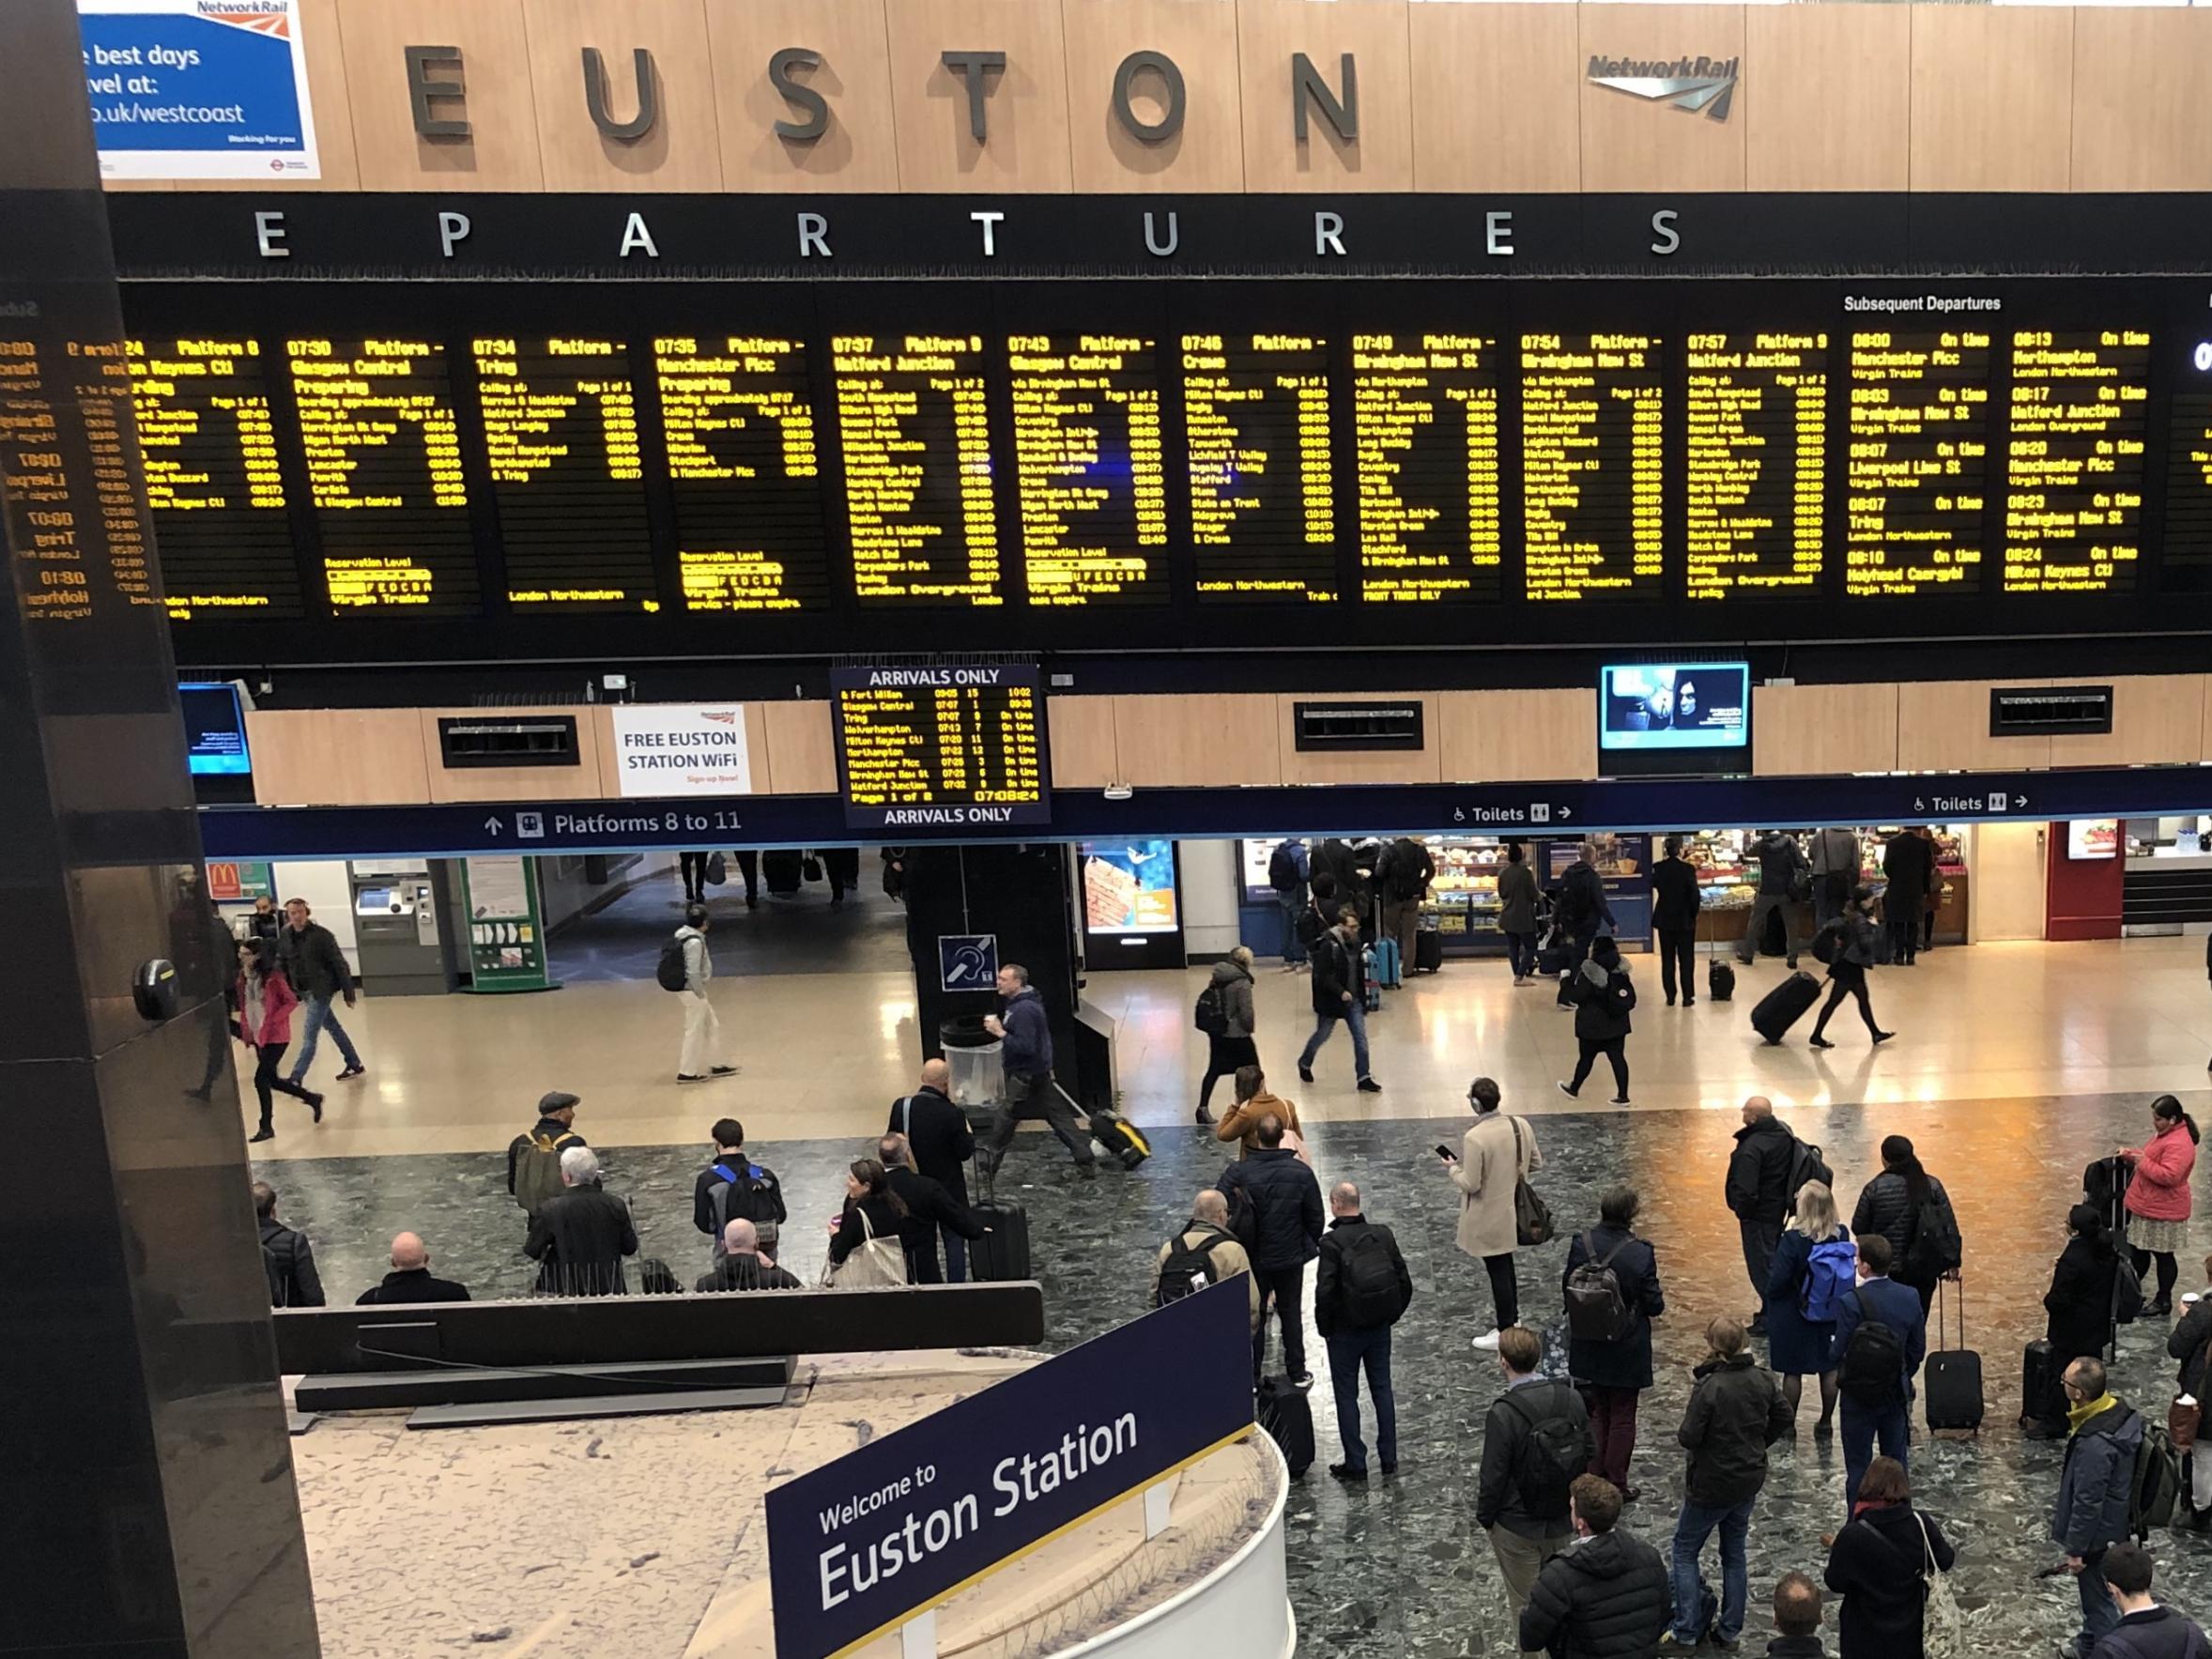 You may need to make a dash from Euston station to the Victoria line